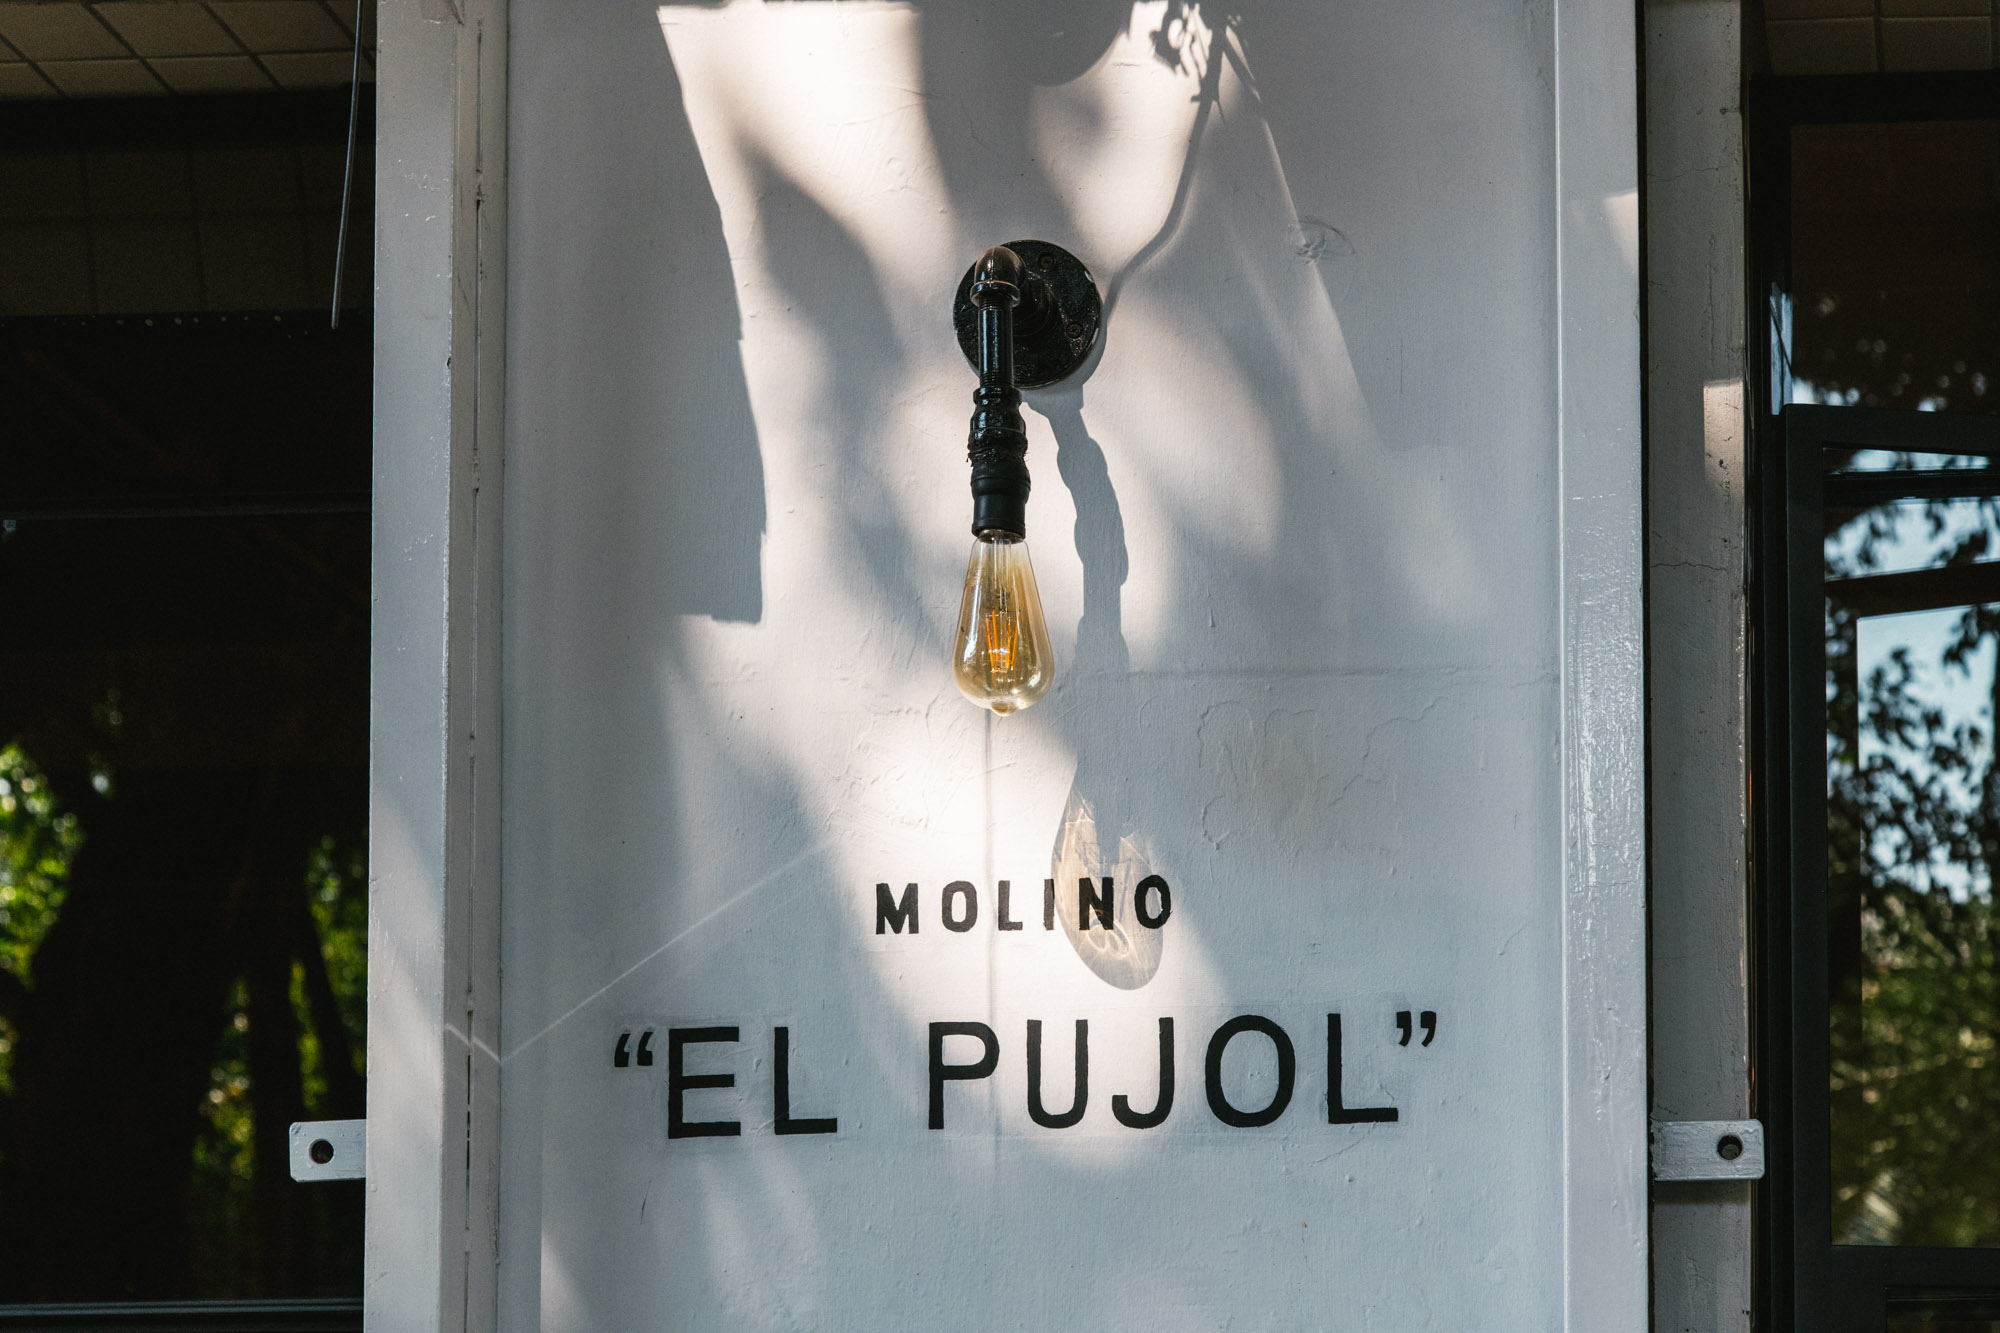 Molino El Pujol - Travelling to Mexico City - Jeff On The Road - Jeff Frenette Photography